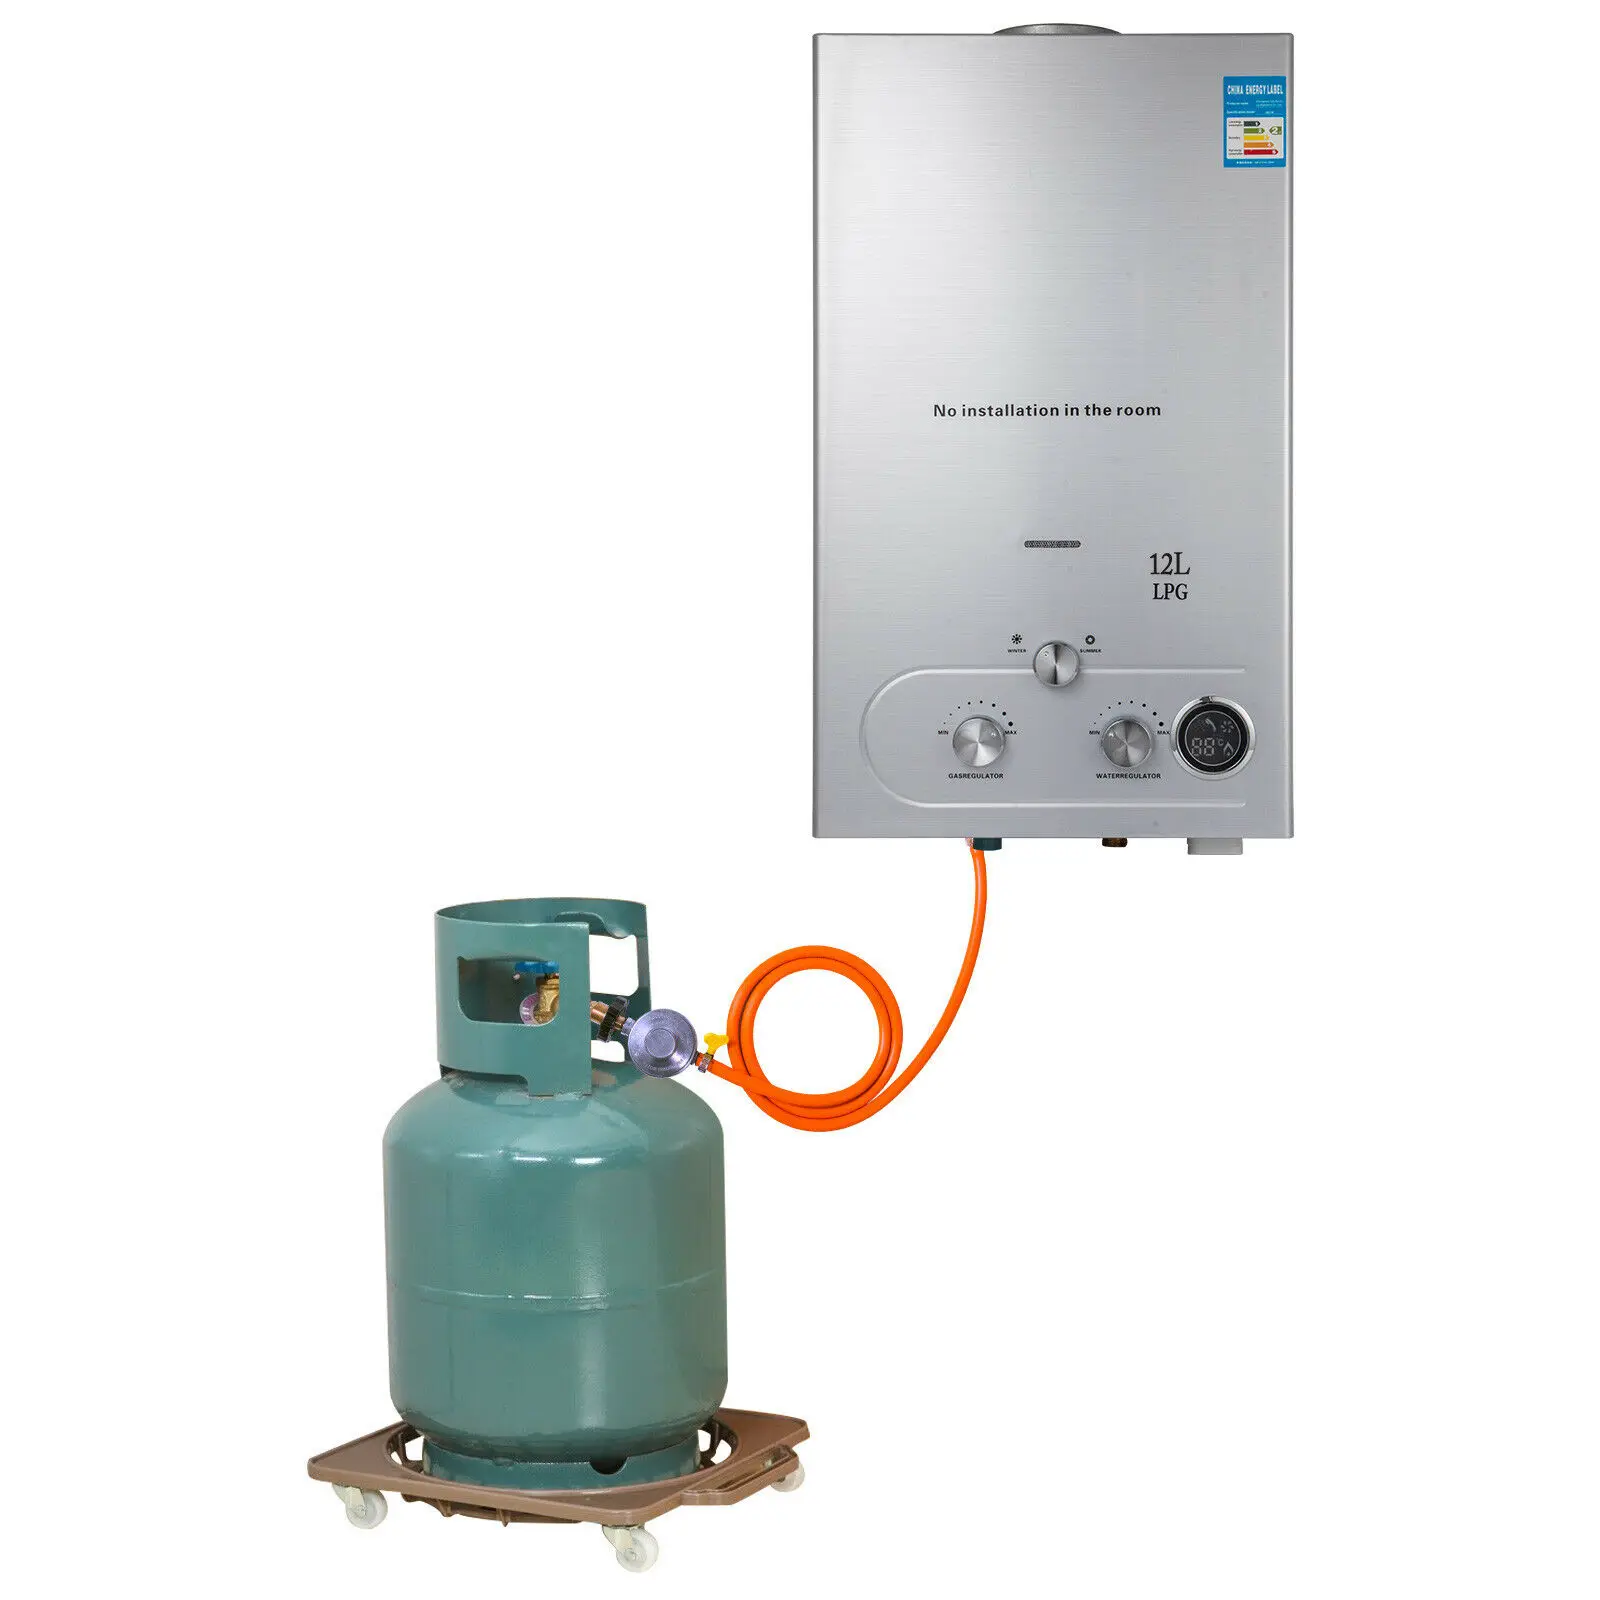 12L LPG Propane Gas Instant Hot Water Heater Boiler Outdoor Stainless Steel New